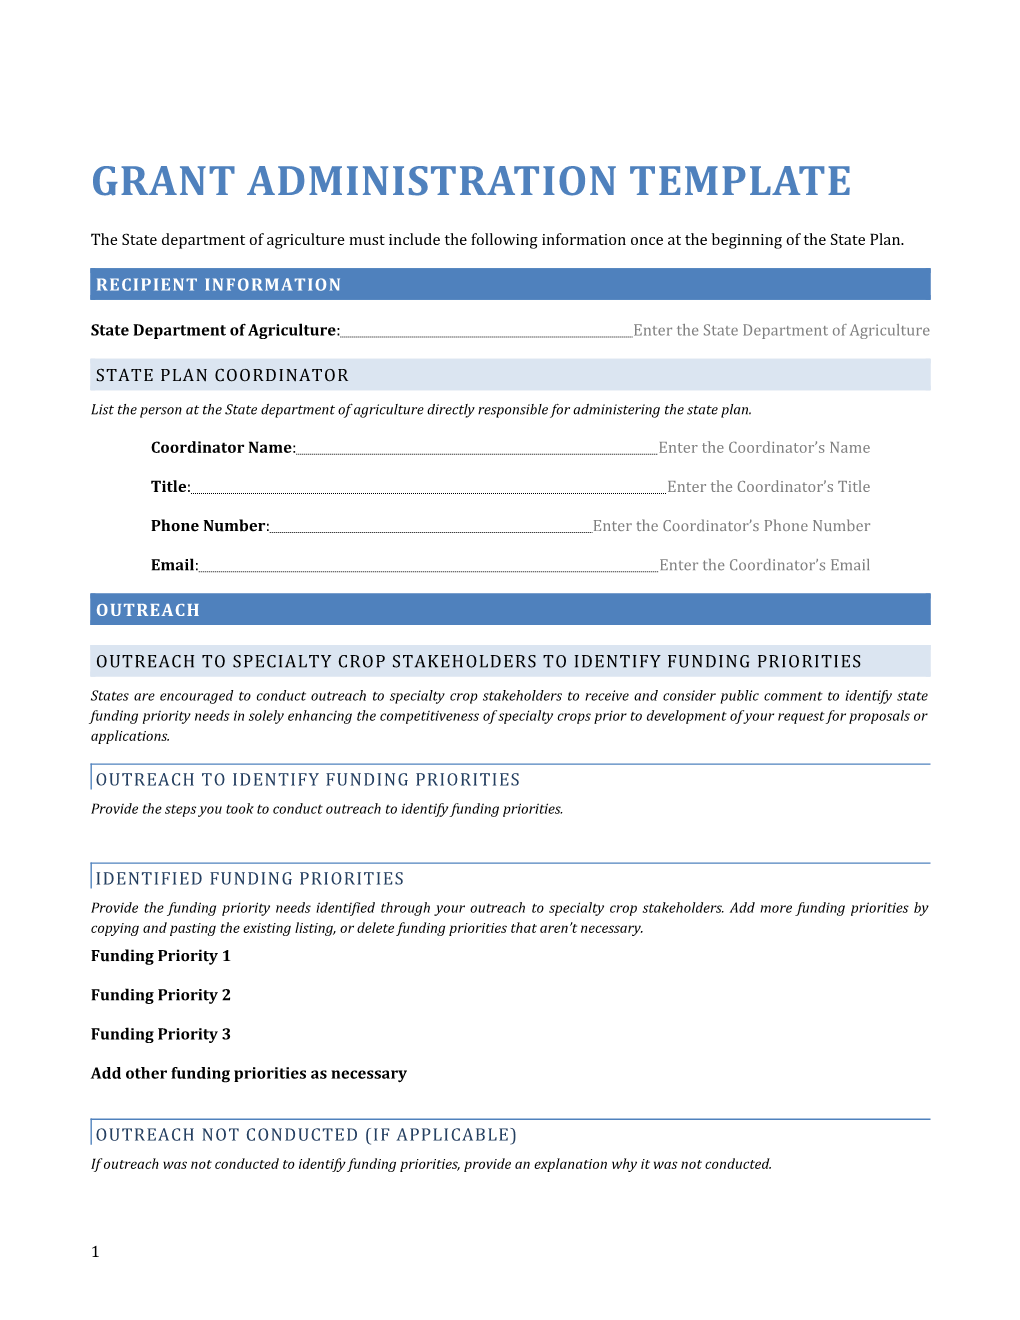 State Department of Agriculture Grant Administration